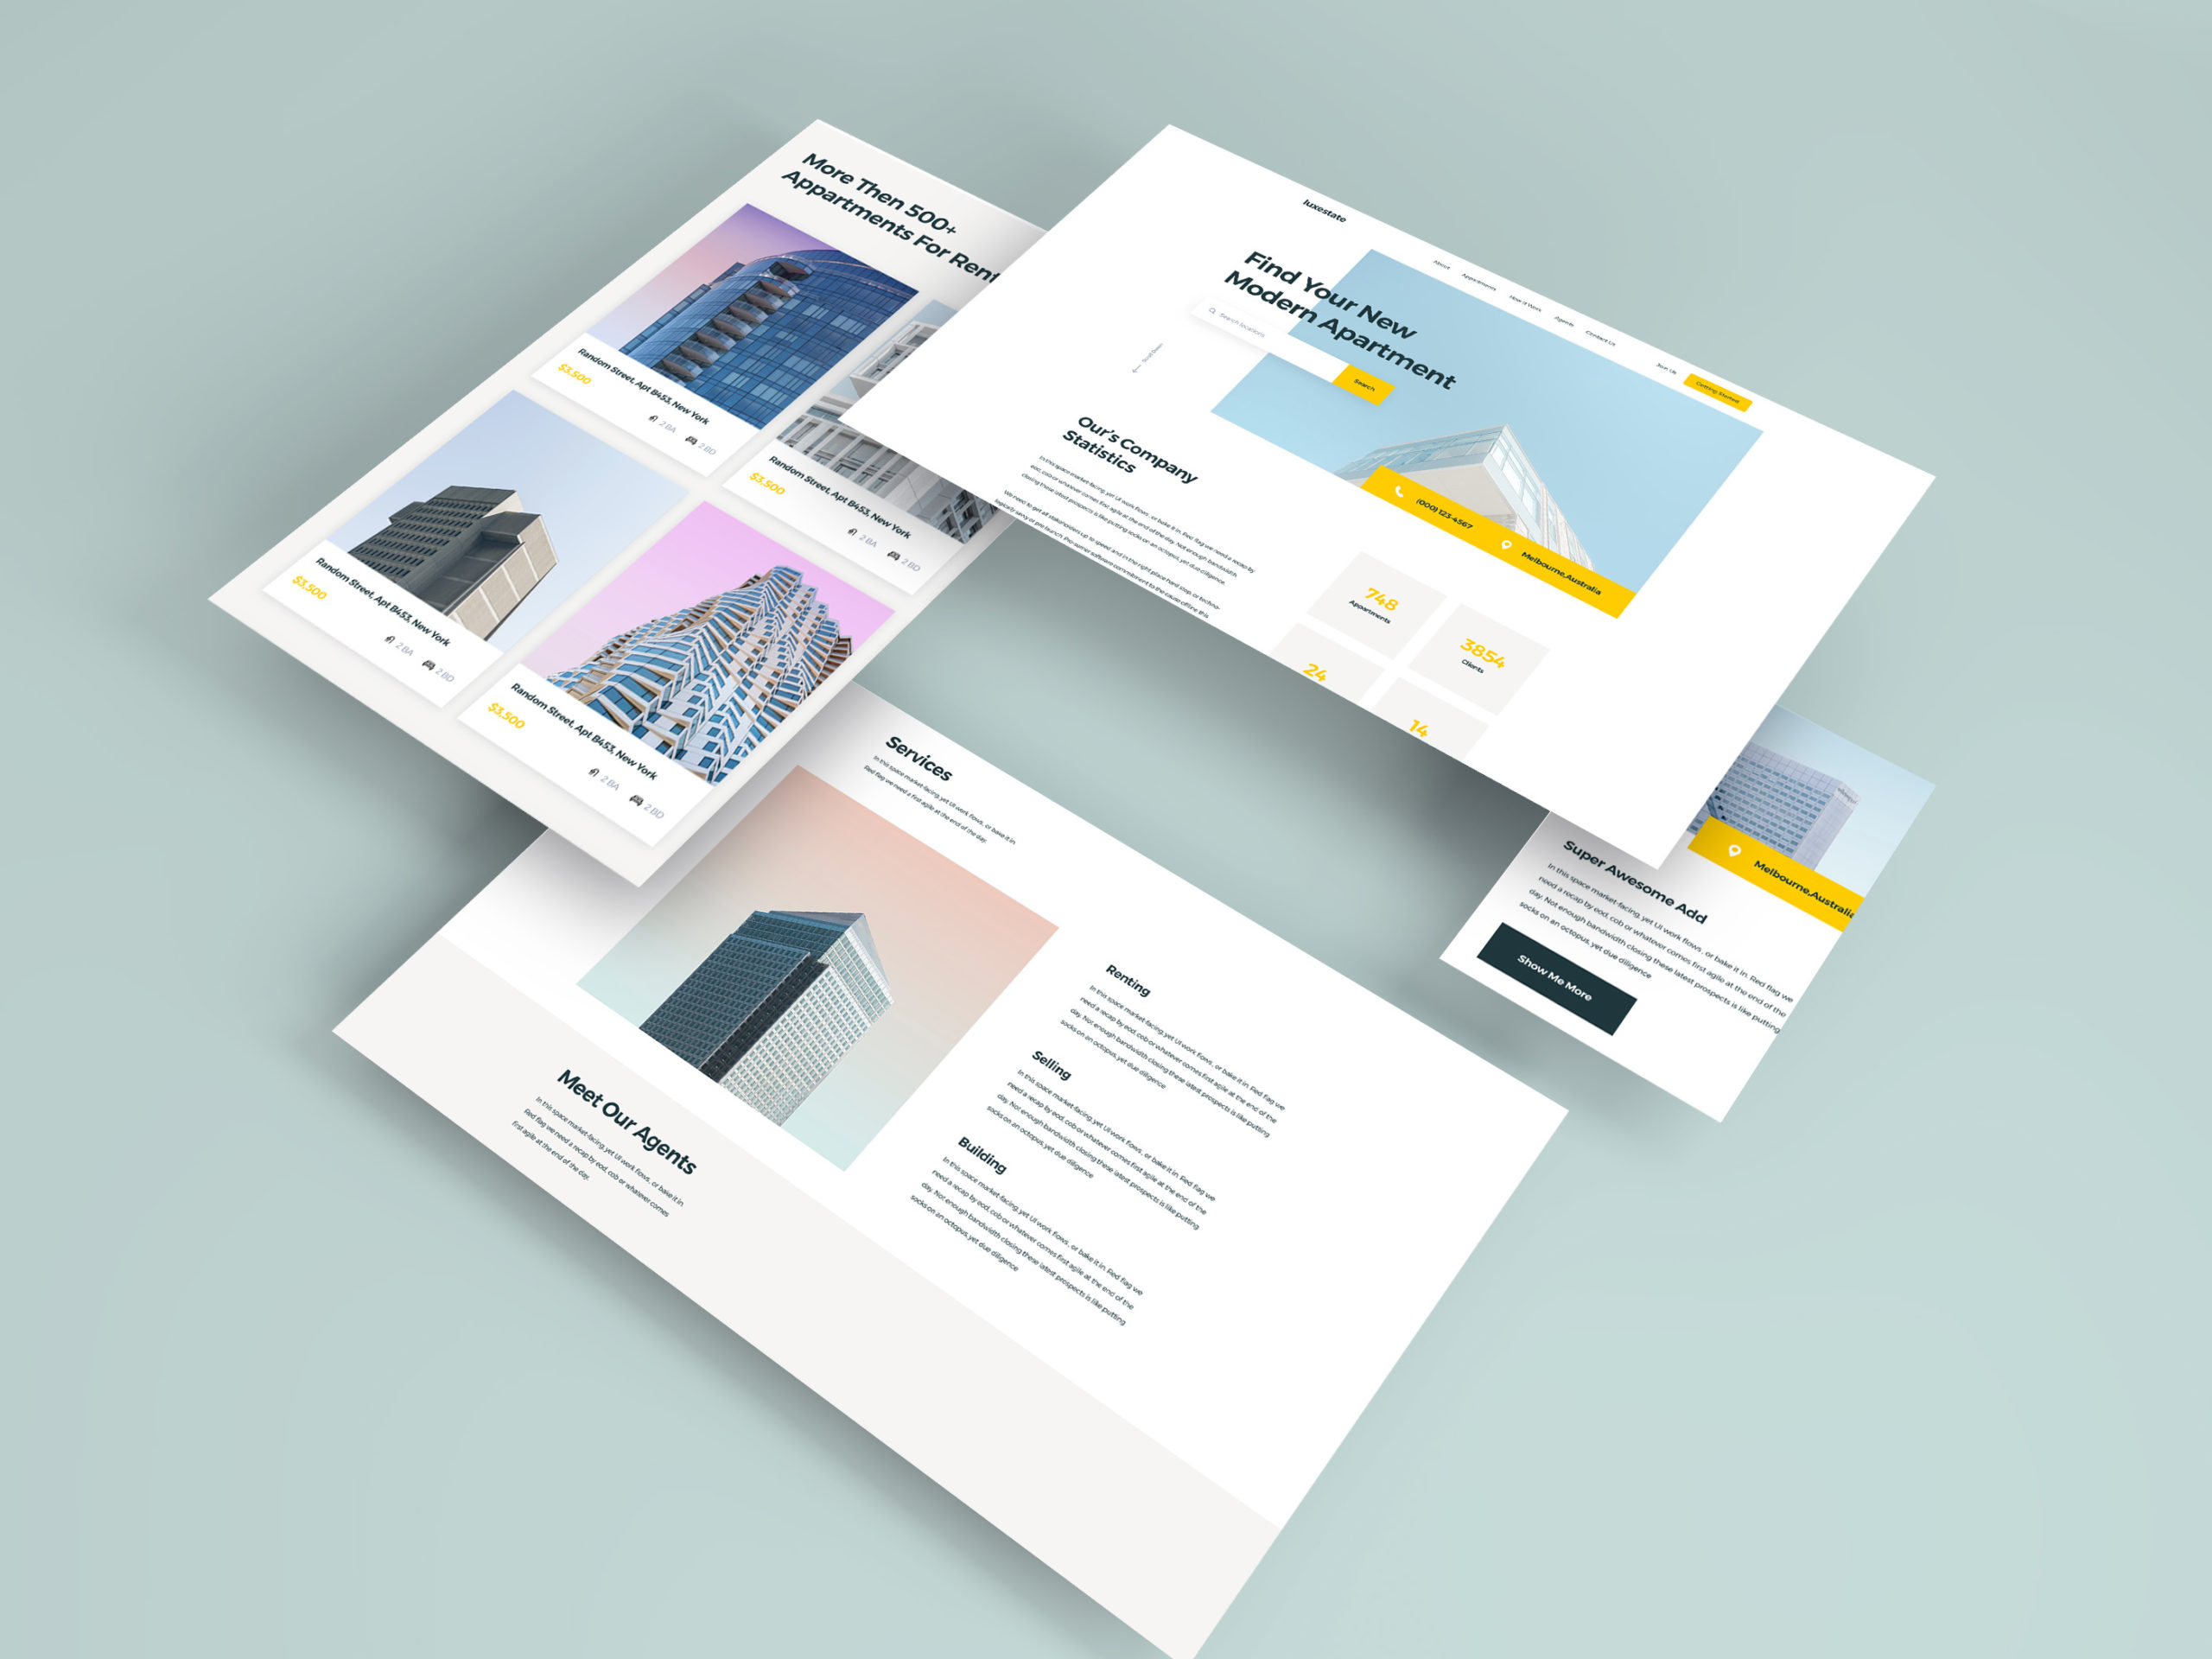 Download Isometric Web Pages Mockup - Free Download